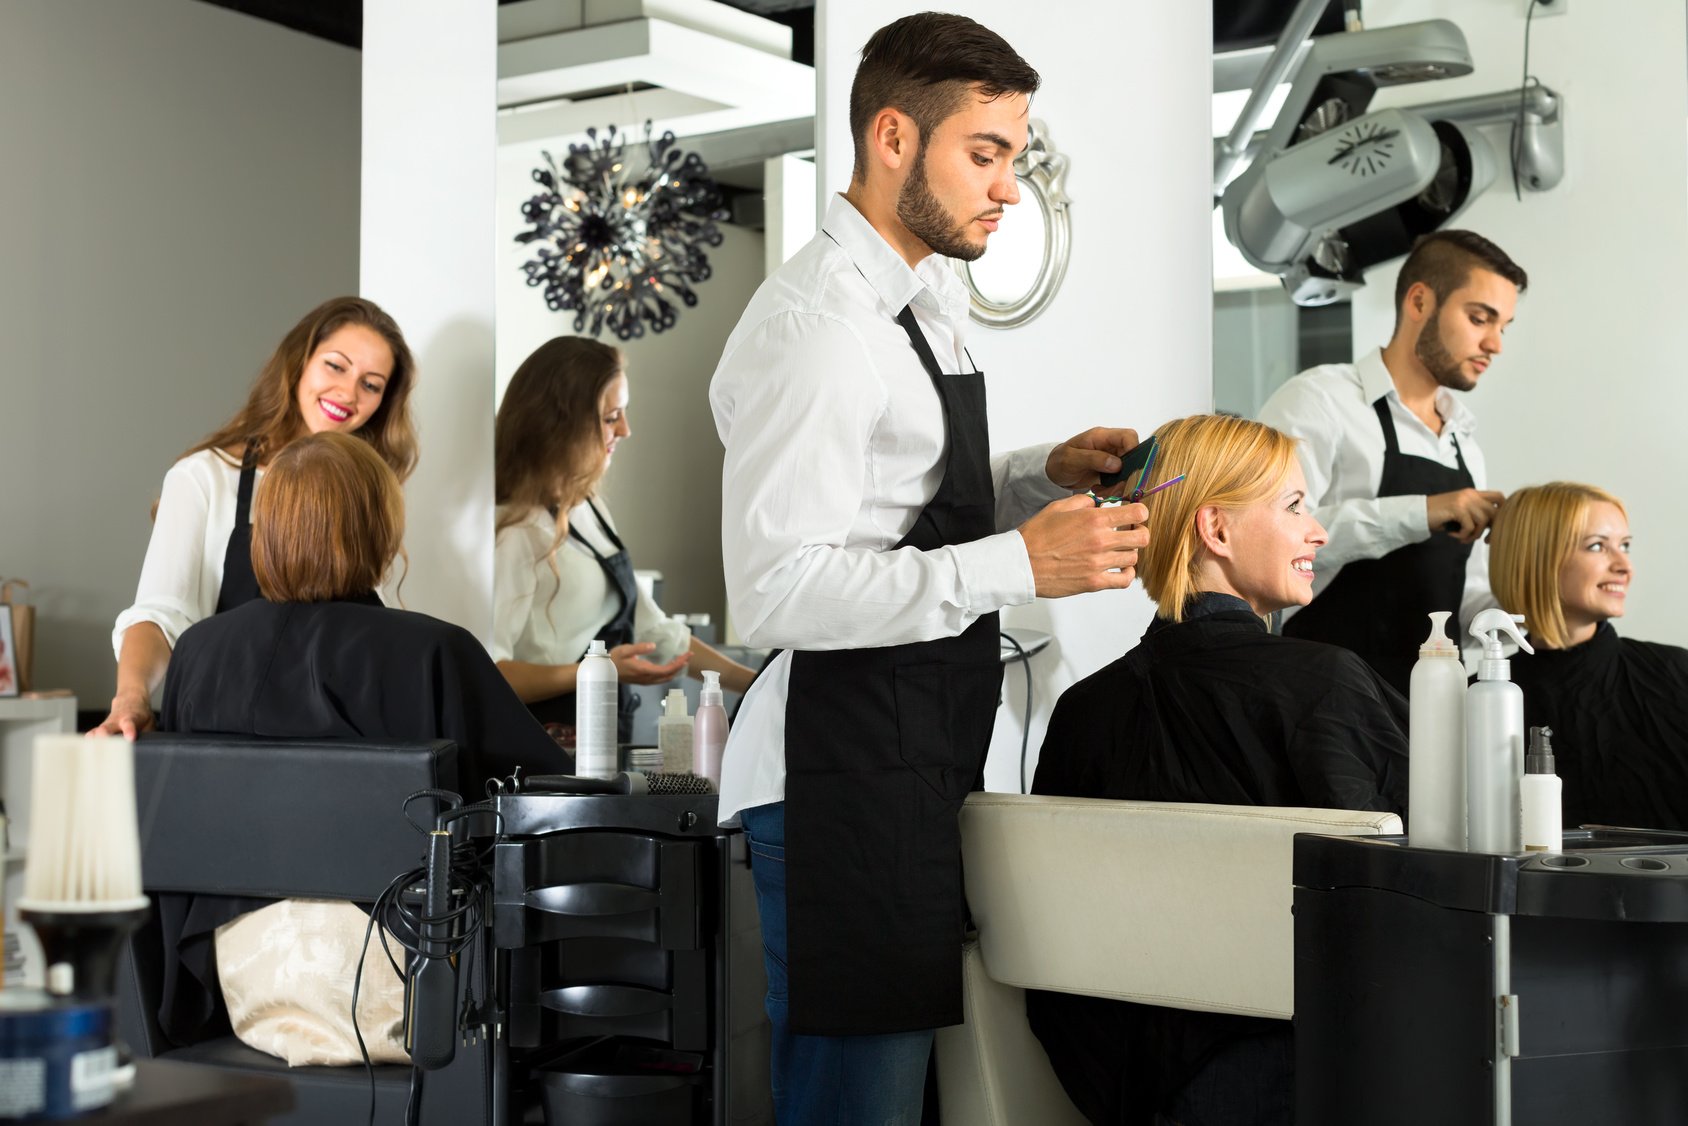 How to find a hair stylist that left